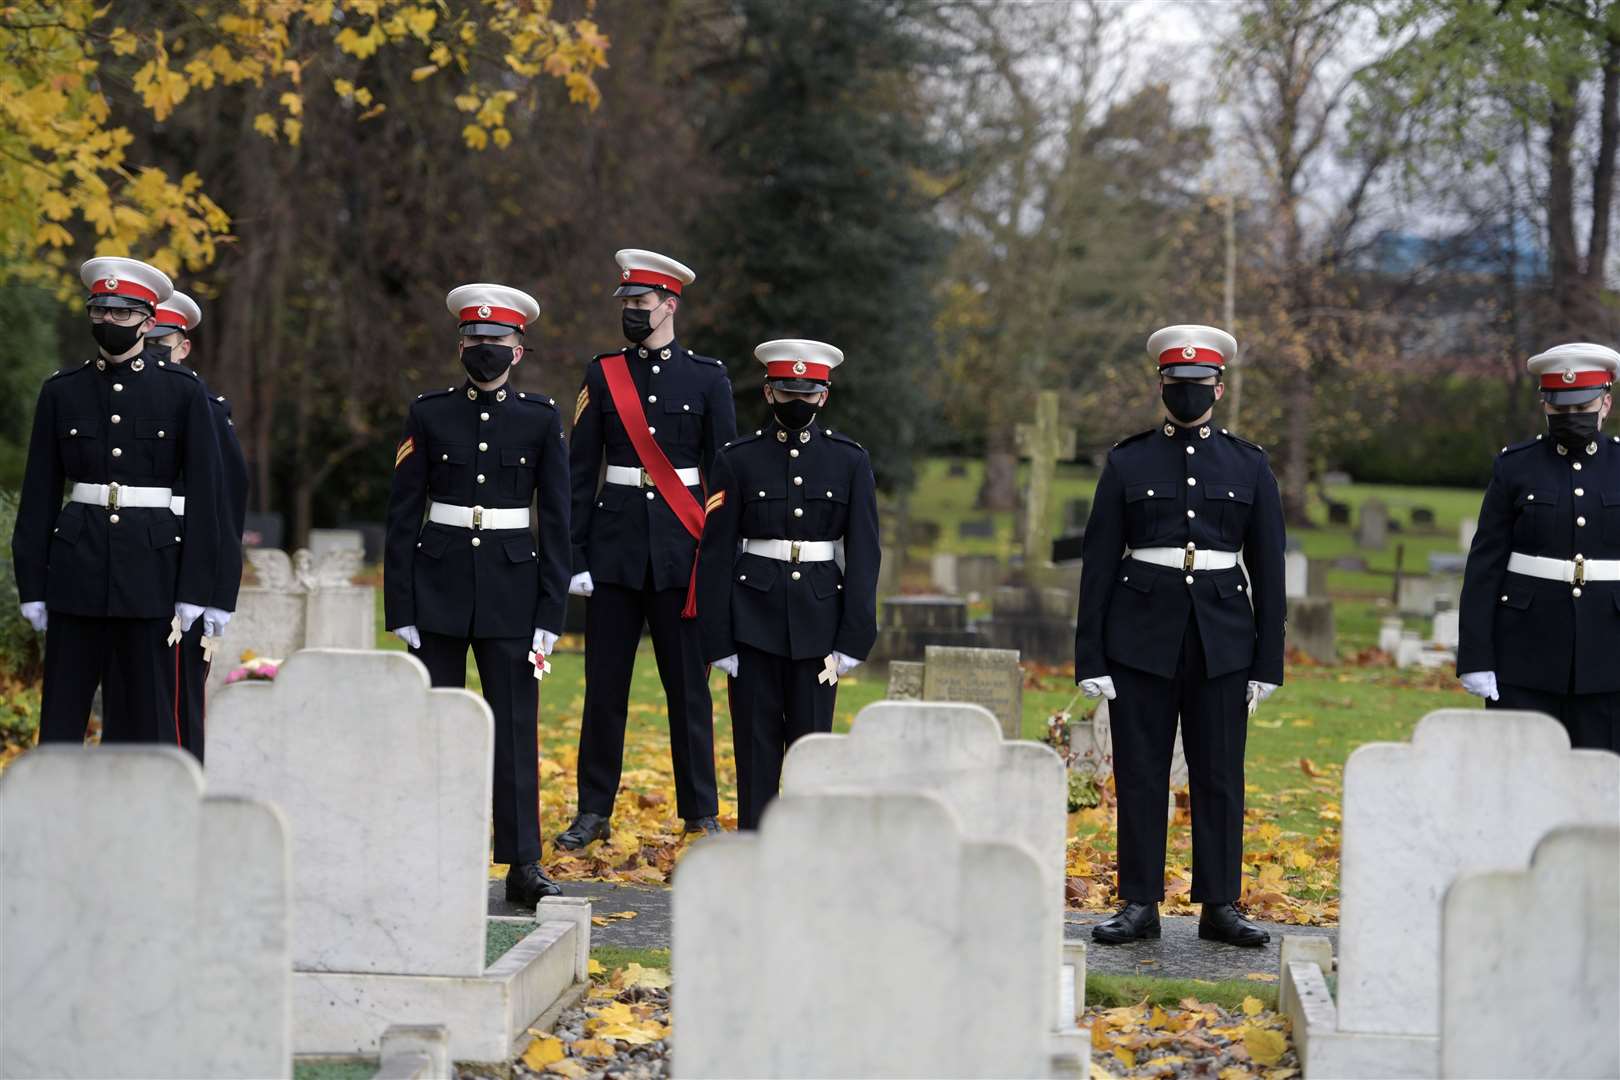 70th anniversary of Dock Road tragedy when 24 marine cadets lost their lives in a bus crash recognised in service at Woodlands Cemetery in Gillingham. Picture: Barry Goodwin